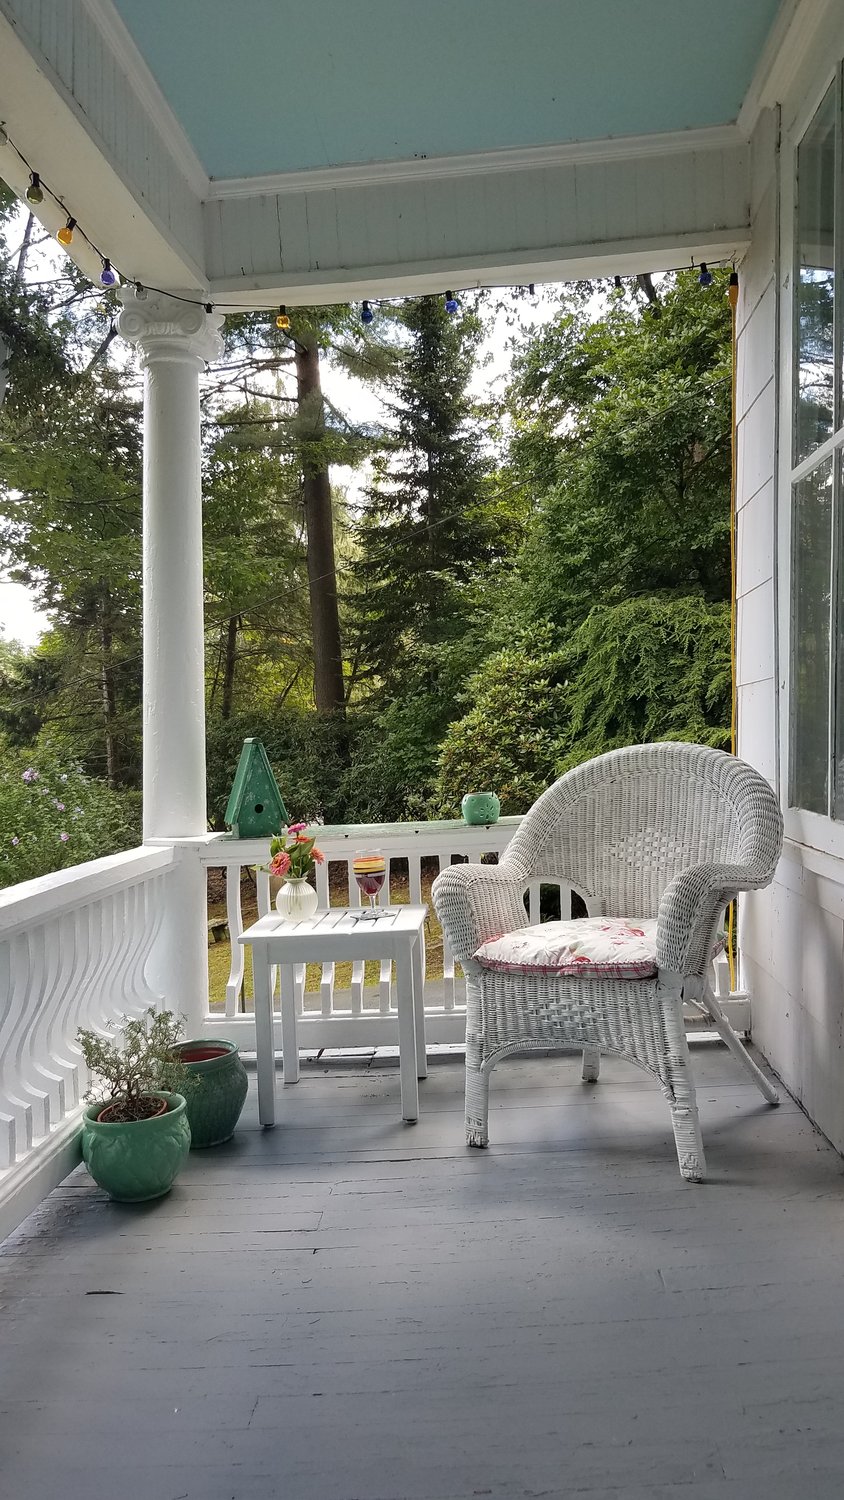 This comfortable porch, complete with an antique wicker chair, is the perfect place for catching a cool summer breeze. Because of the lush green wooded area that surrounds the house, there is a delightful sense of the outdoors within the confines of the porch. Against the white background, simple accents of greens and blues enhance the porch’s 19th-century Victorian architectural elements. ..